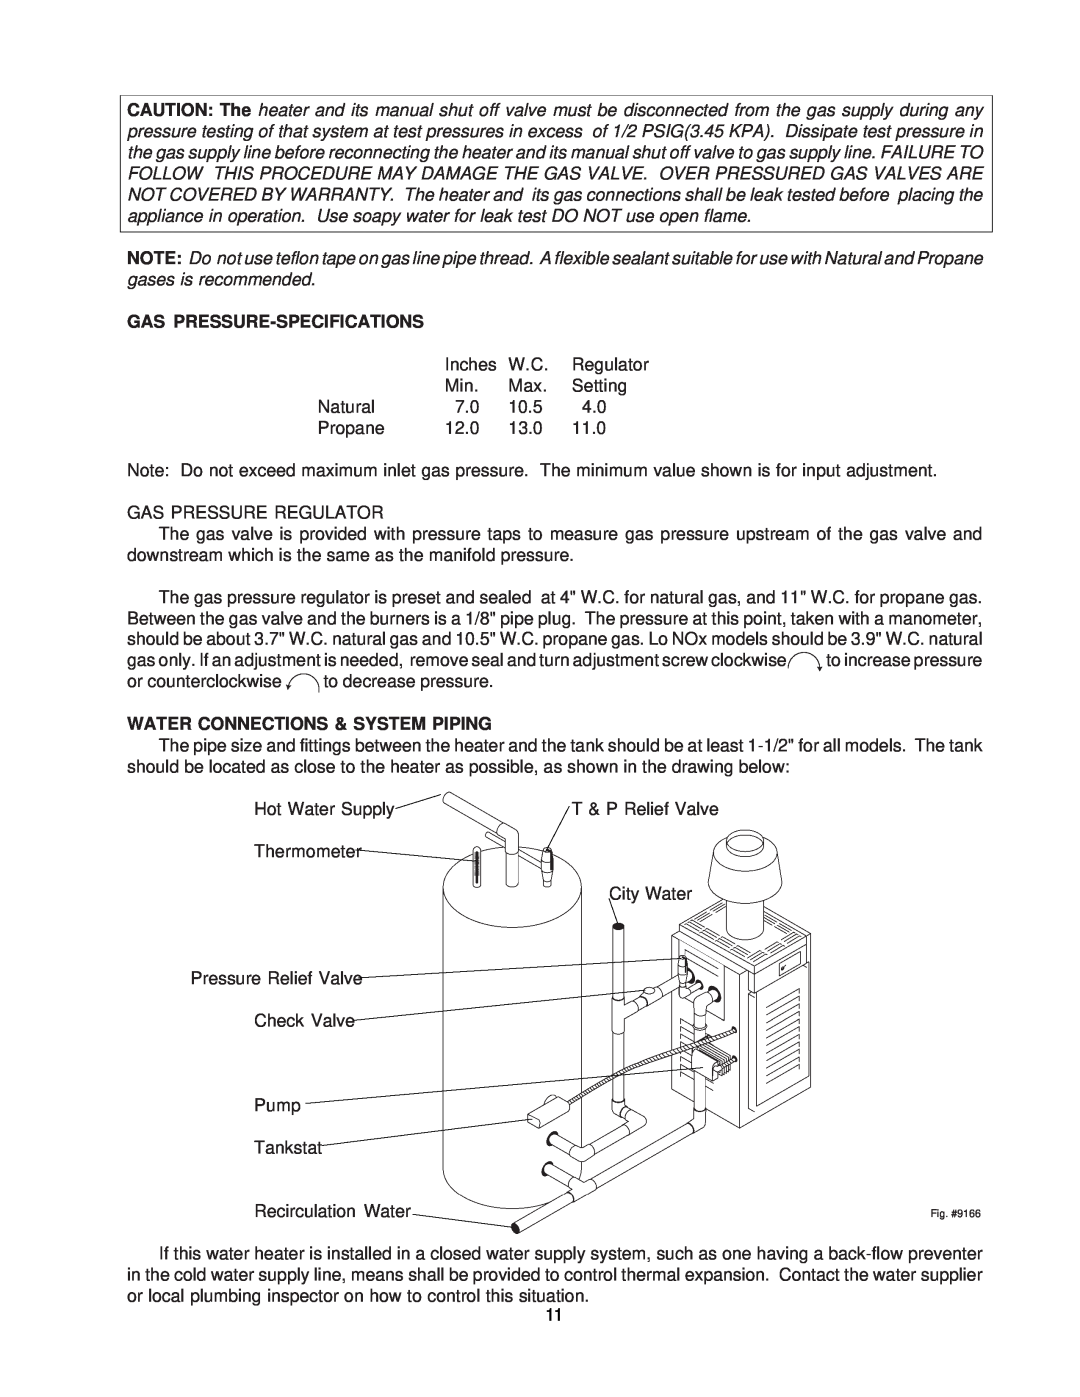 Raypak 260-401 manual Gas Pressure-Specifications, Water Connections & System Piping 